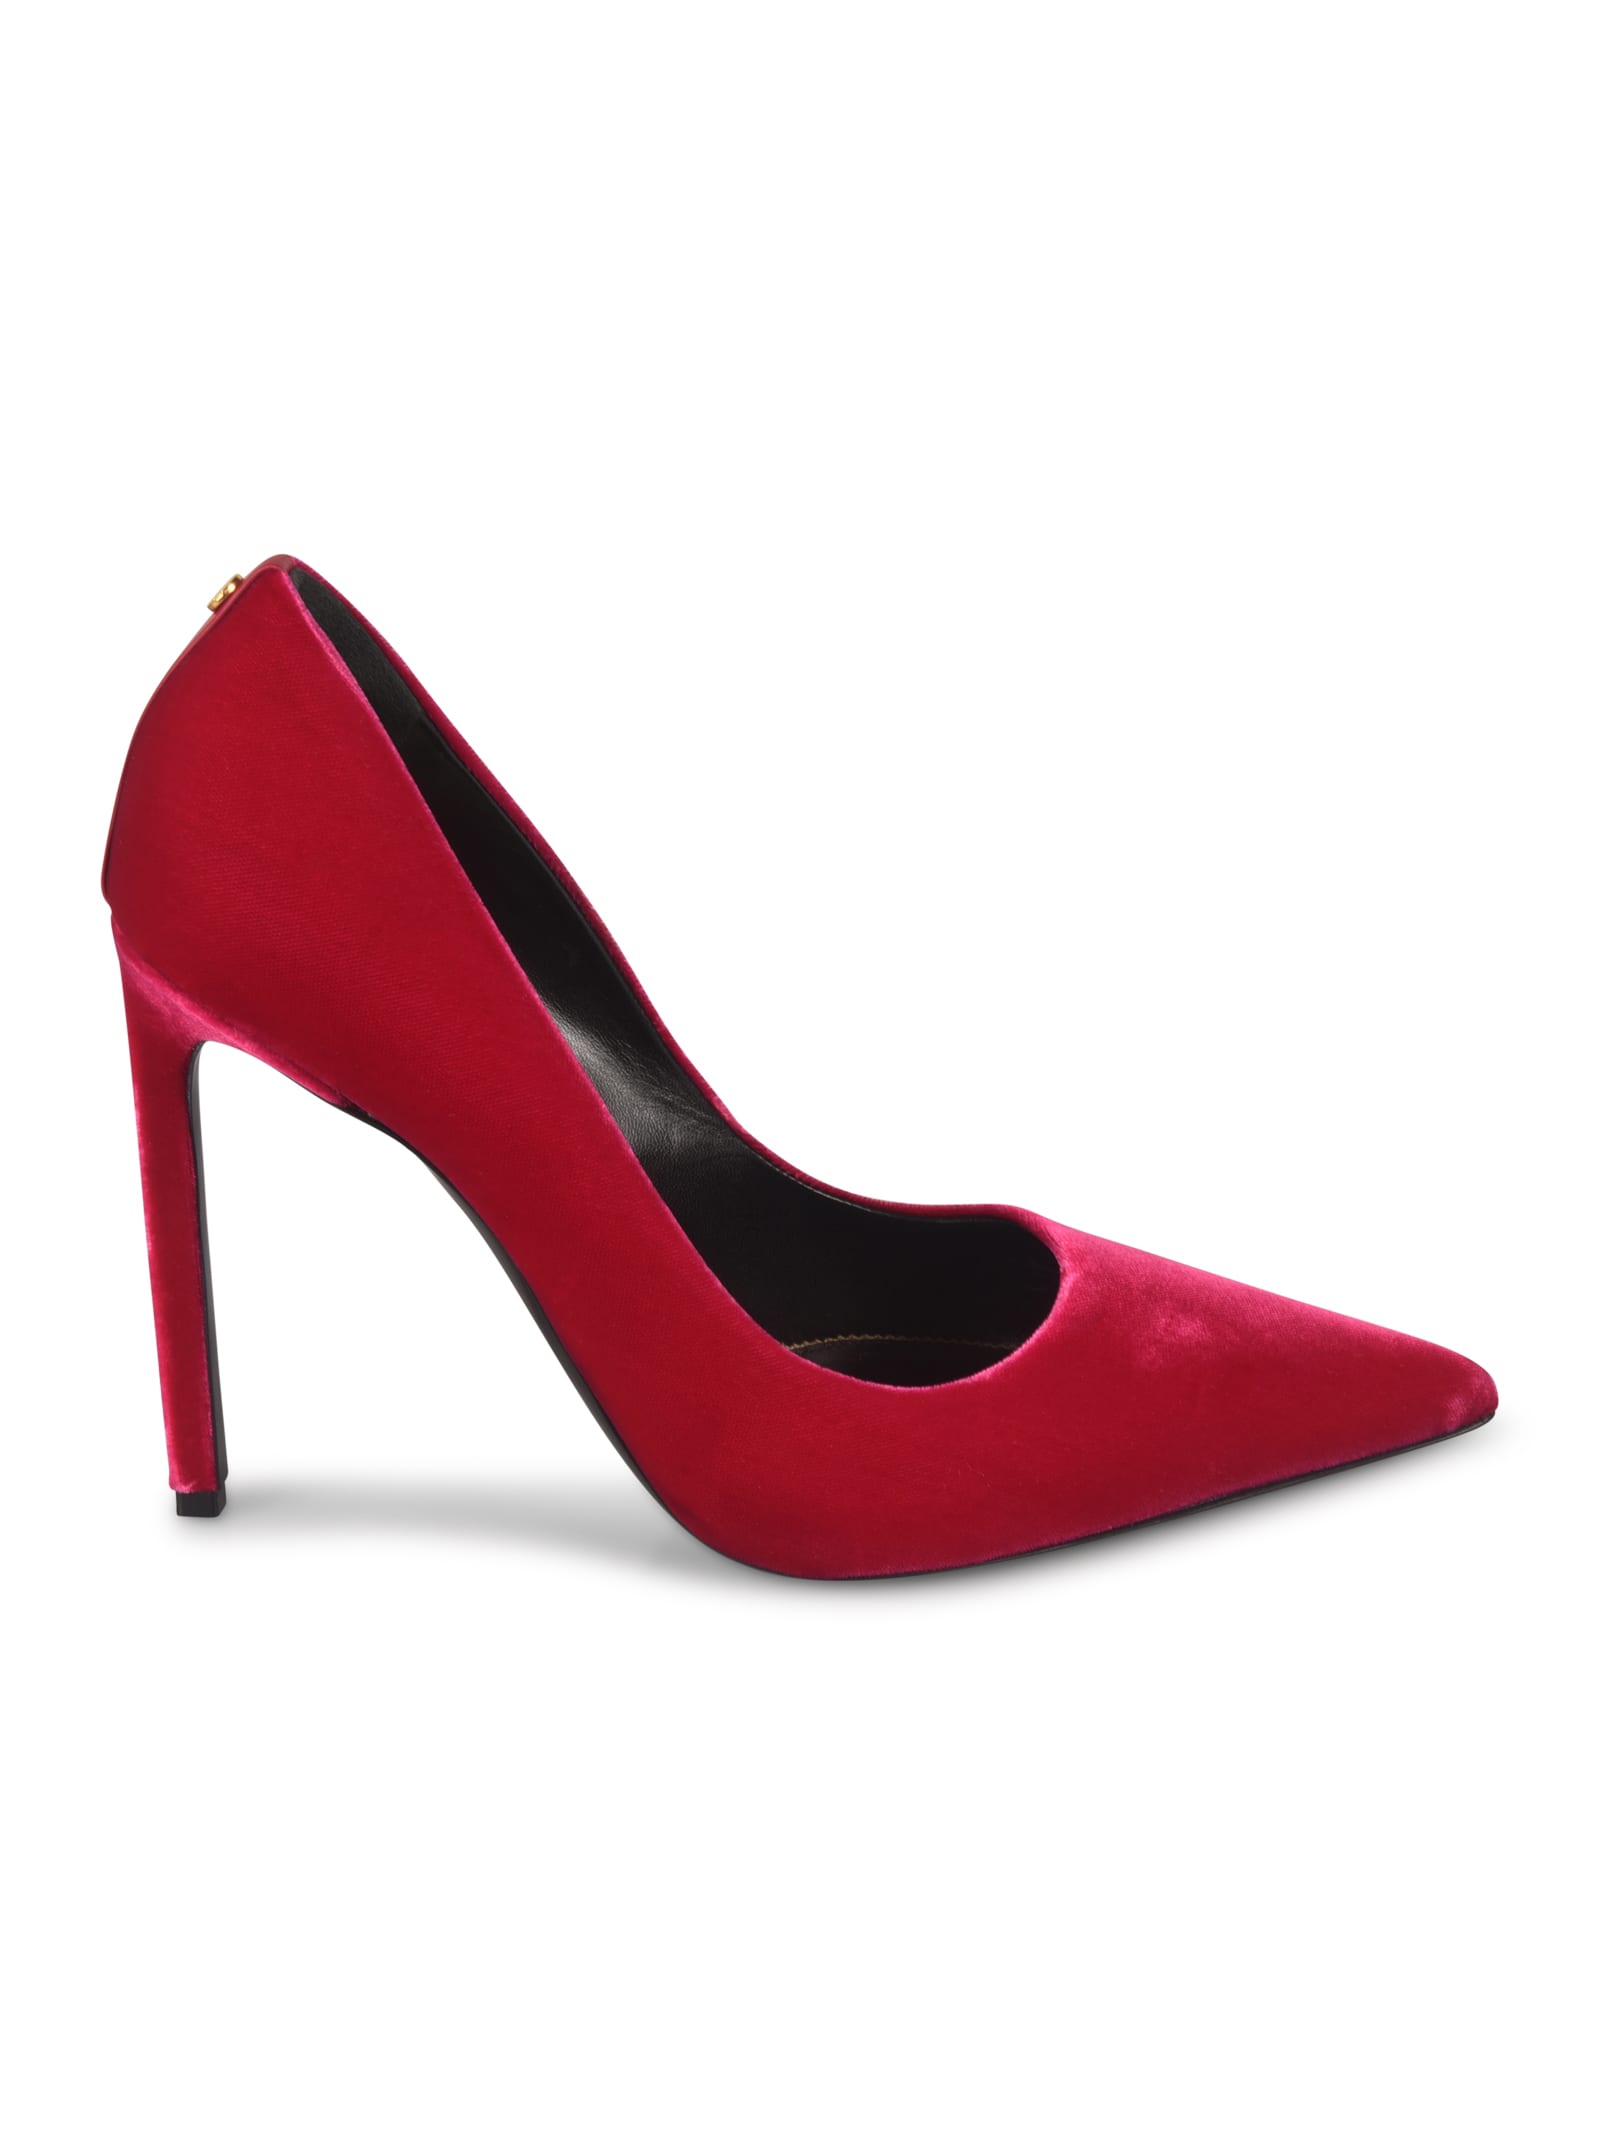 Tom Ford Classic Pointed Toe Pumps